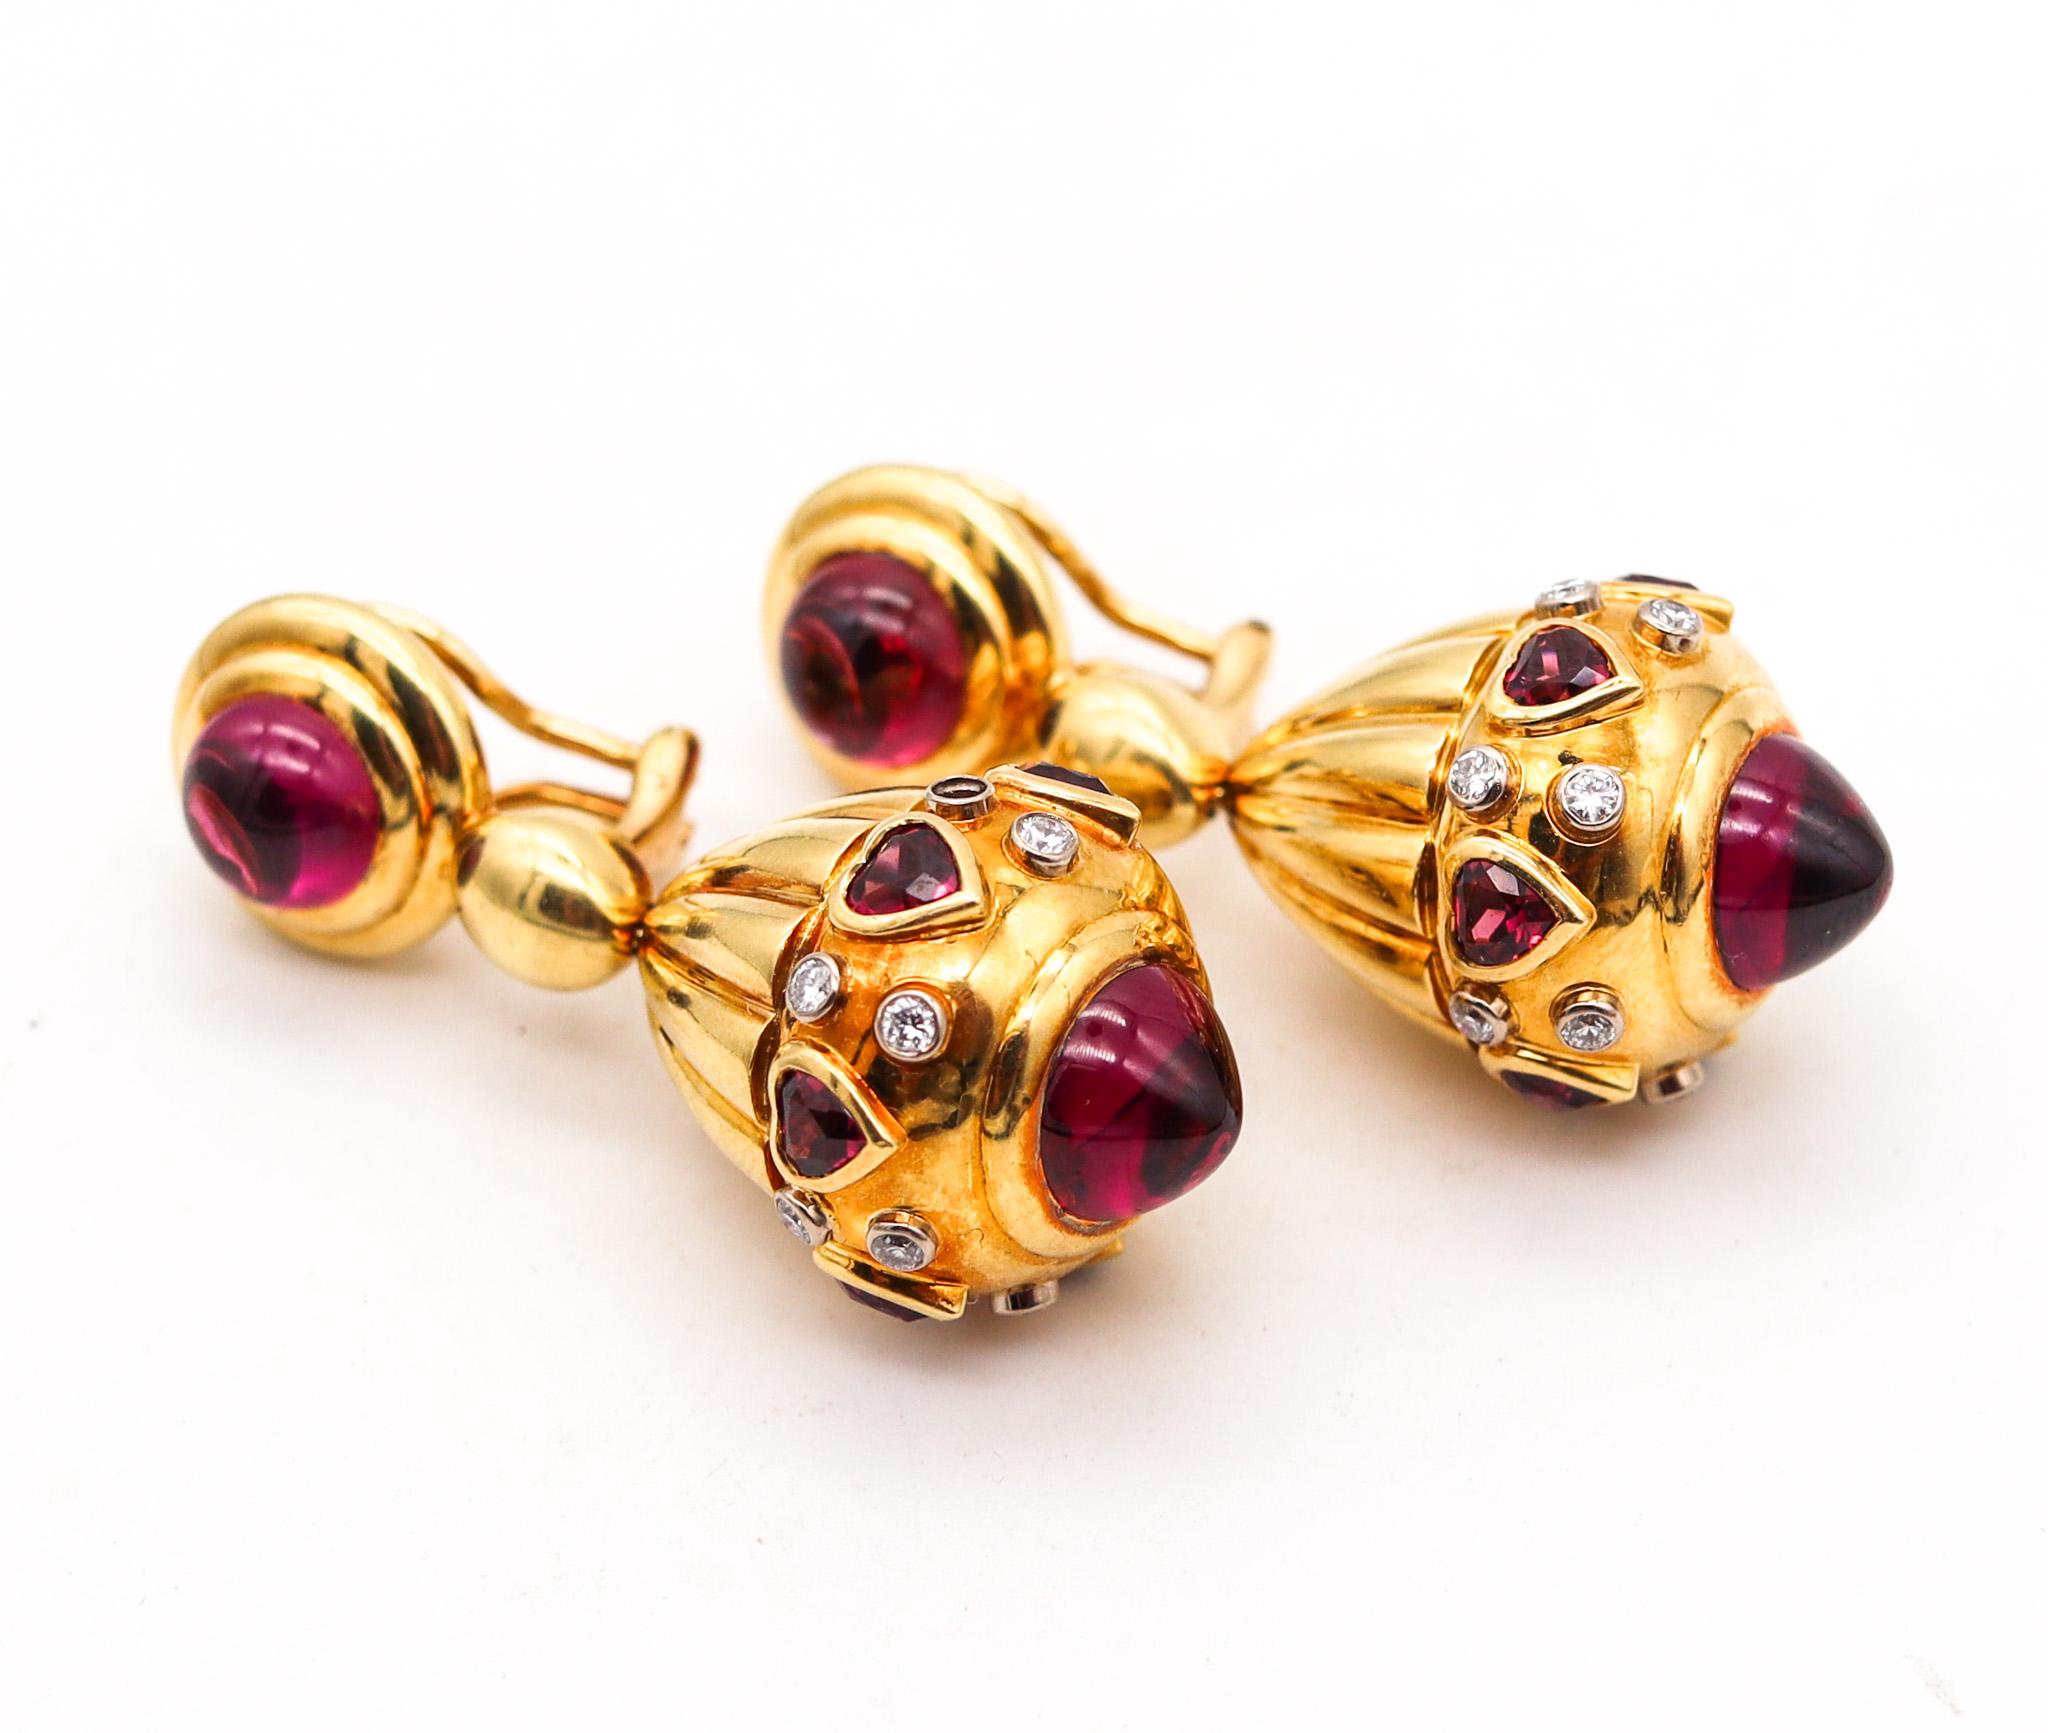 Brilliant Cut British Dangle Drop Earrings In 18Kt Gold With 17.46 Ctw Diamonds And Rhodolite For Sale